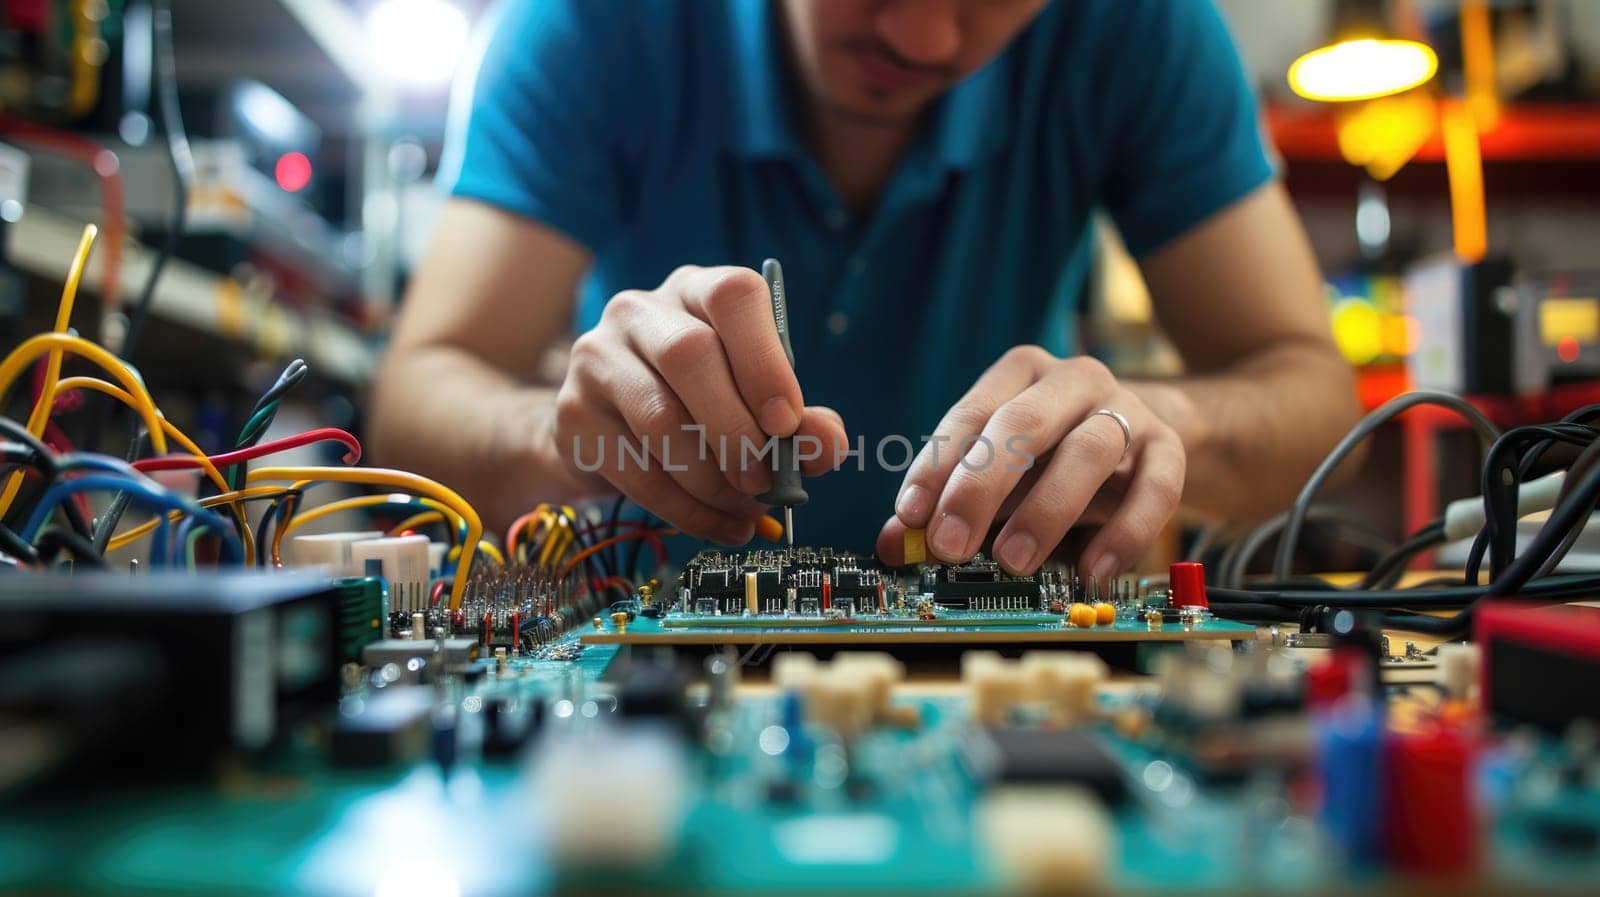 A person is working on a motherboard with a soldering iron AIG41 by biancoblue